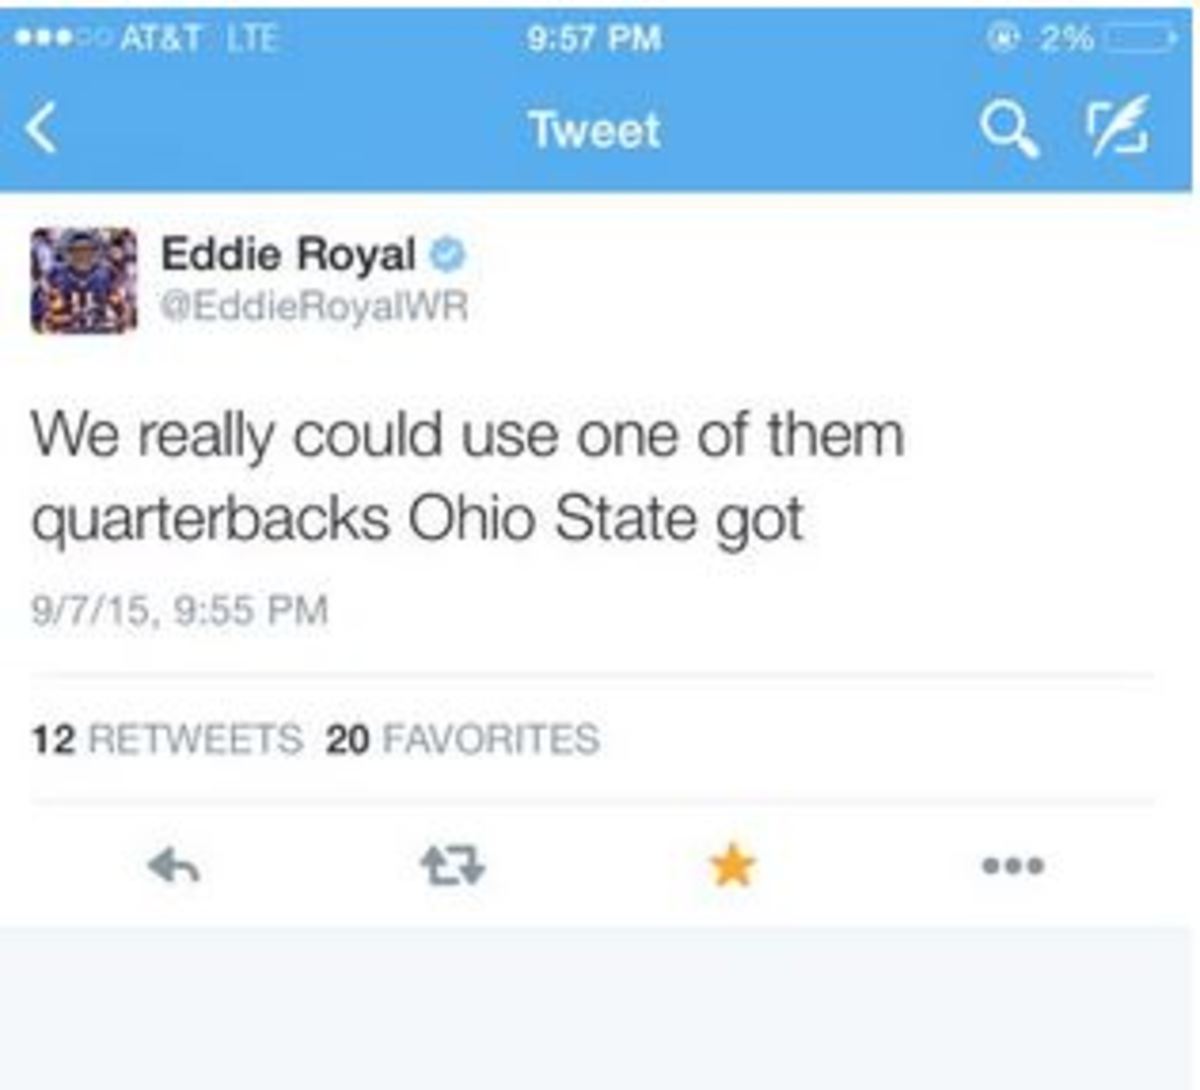 Eddie Royal tweets about wanting one of Ohio State's talented quarterbacks.